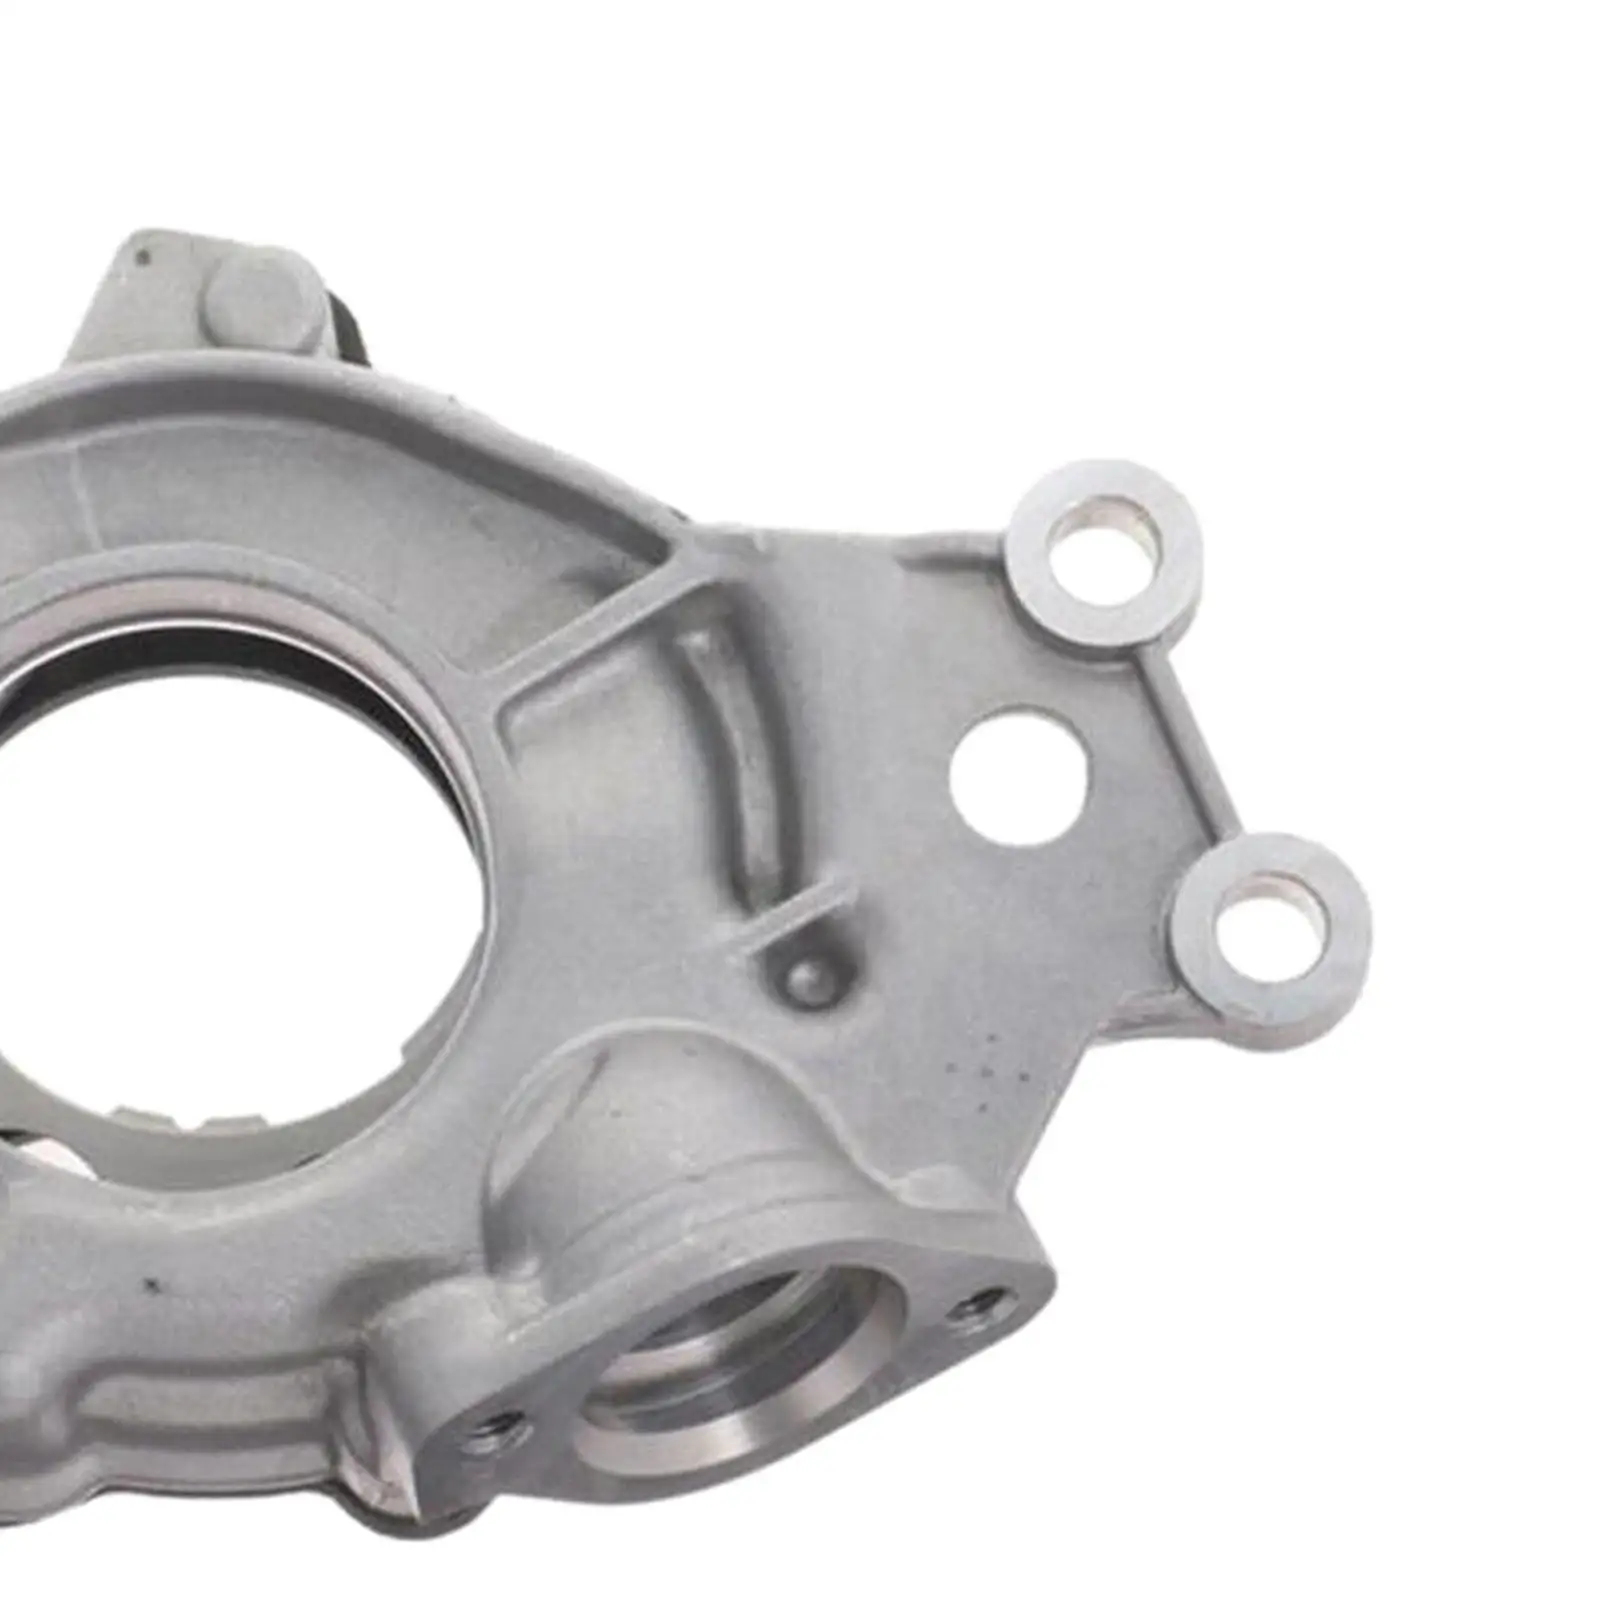 Engine Oil Pump High Performance Quality Direct Replace High Volume Oil Pumps Auto Accessories for LH6 LS4 Lmf L77 LH9